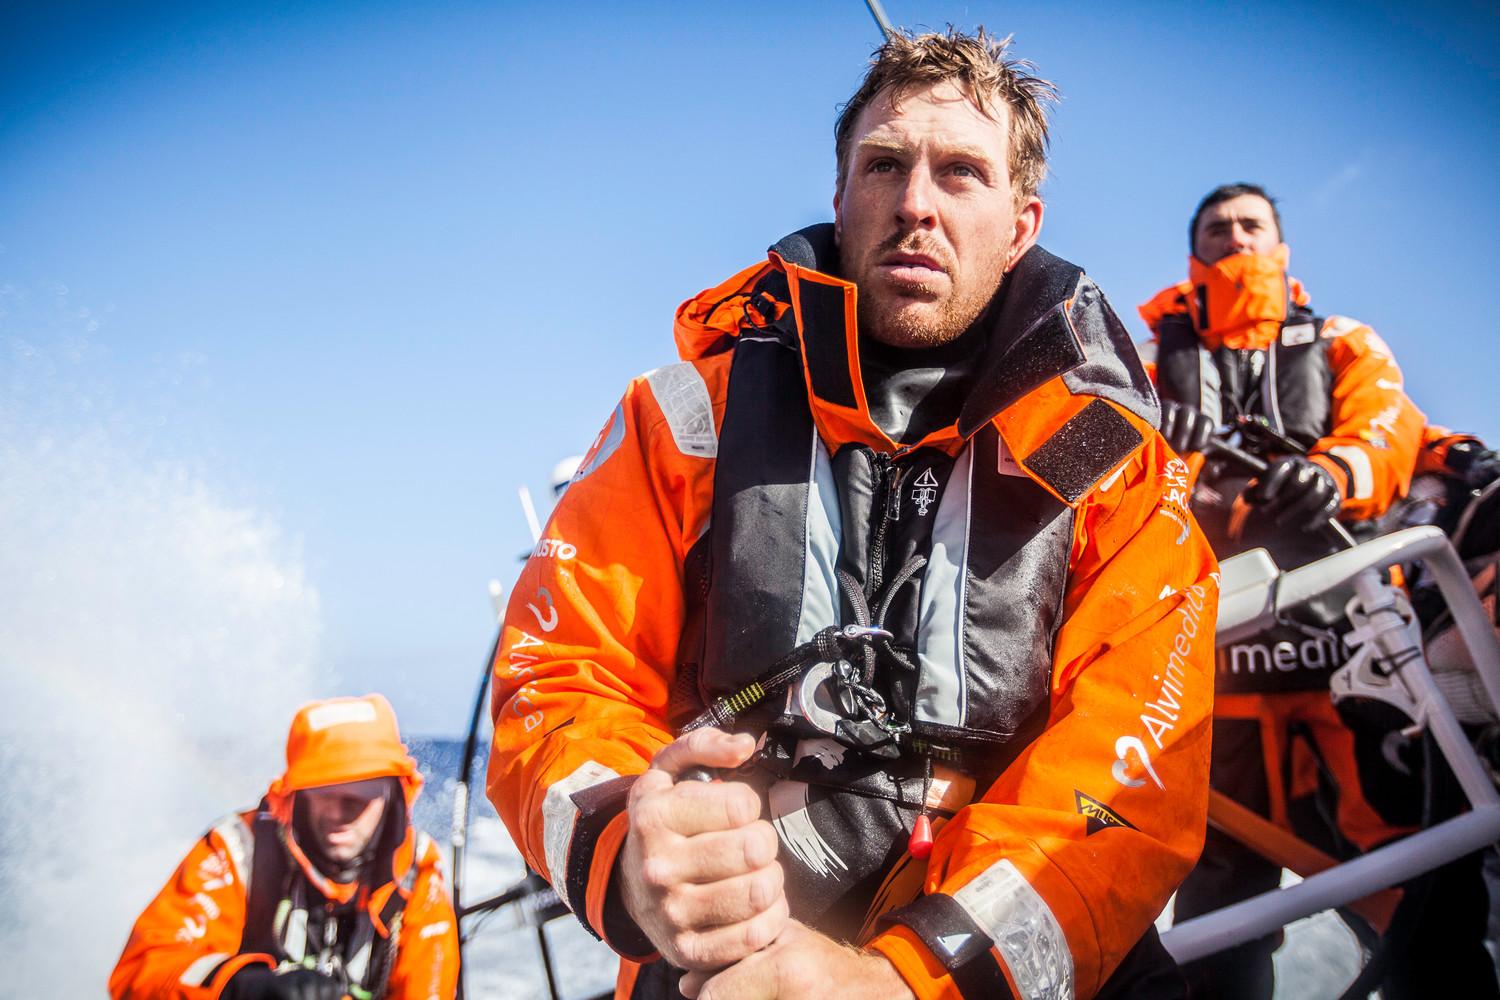 WORLD CLASS SAILOR DAVE SWETE JOINS NORTH SAILS